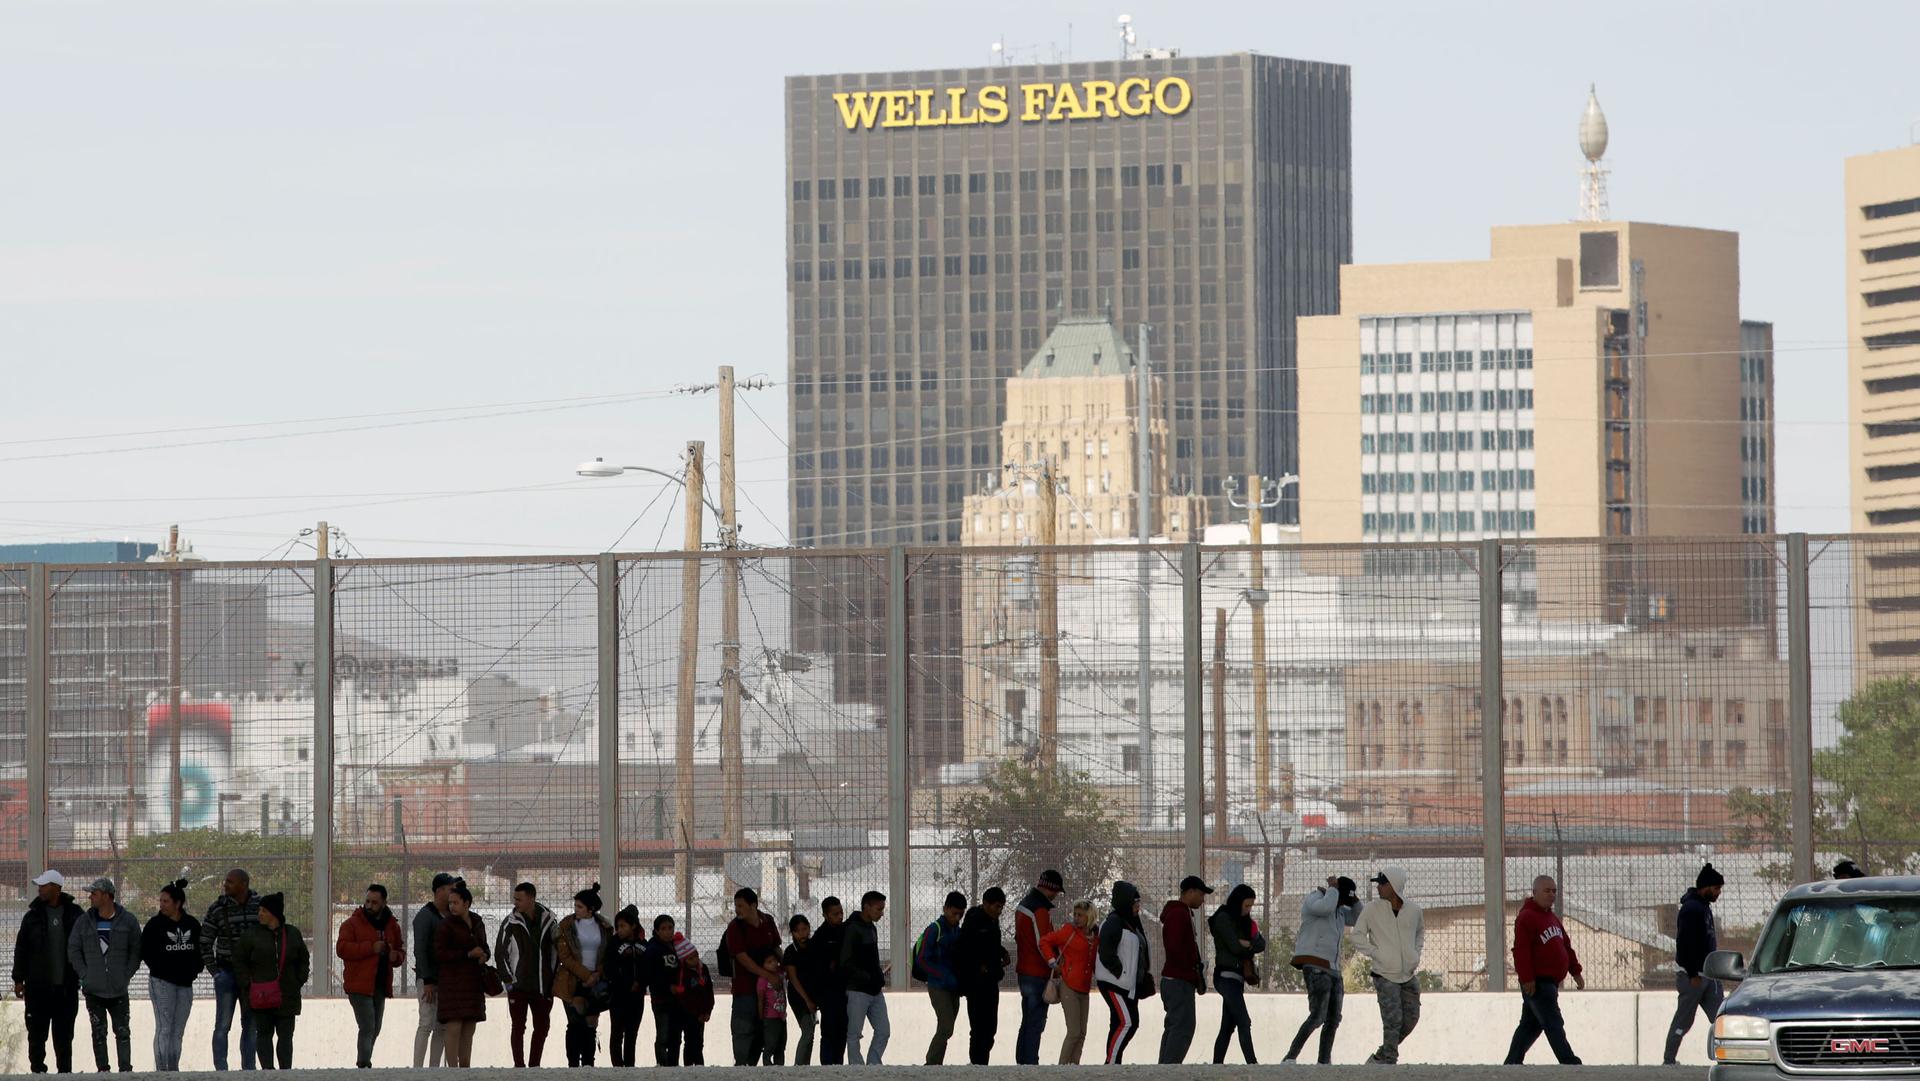 A line of people stand along a fence. Behind them, a high rise office tower reads "Wells Fargo"